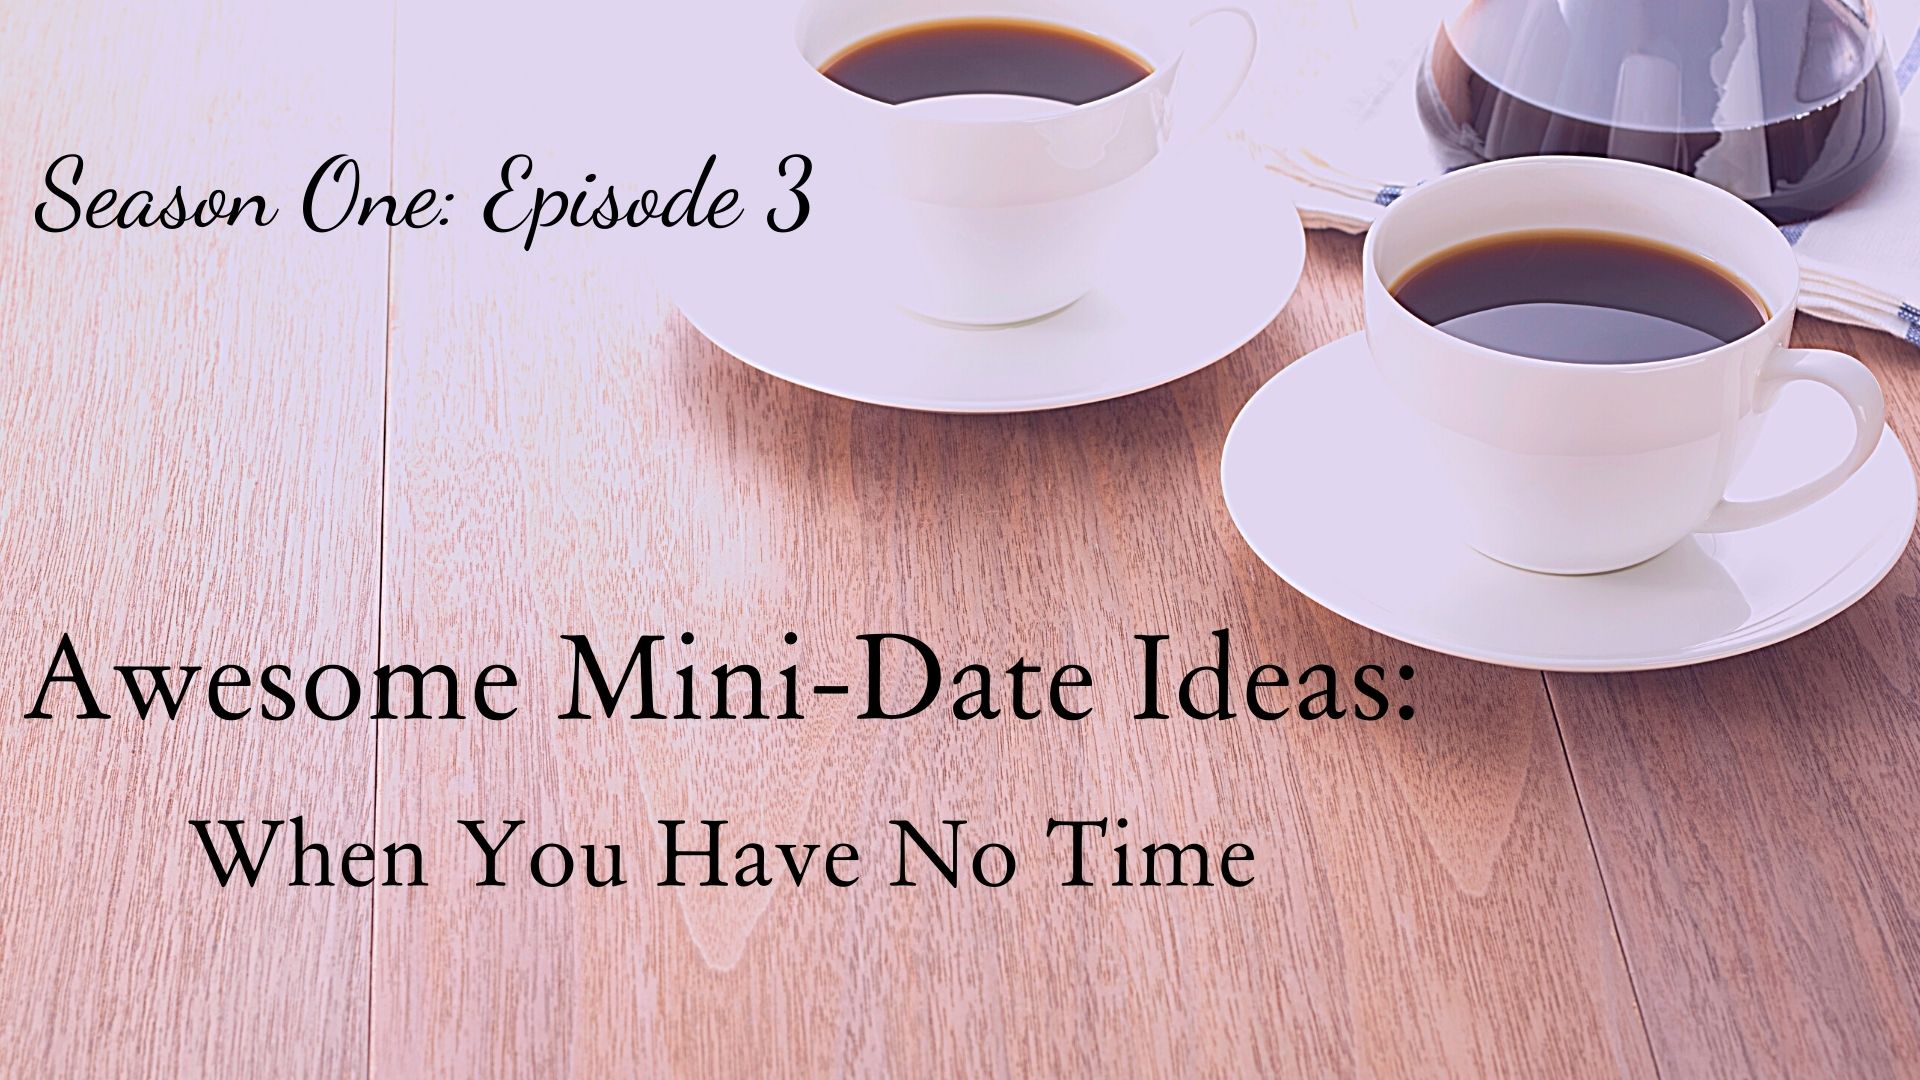 Season One. Episode 3. Awesome Mini-Date Ideas When You Don't Have Time